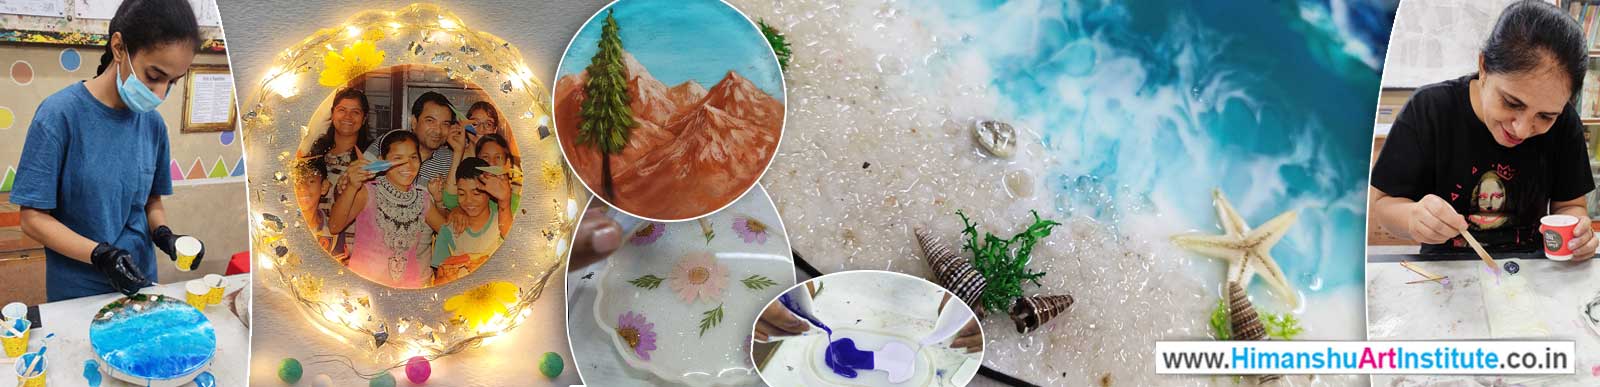 Online Resin Art Classes, Resin Art Course, Professional Certificate Course in Resin Art